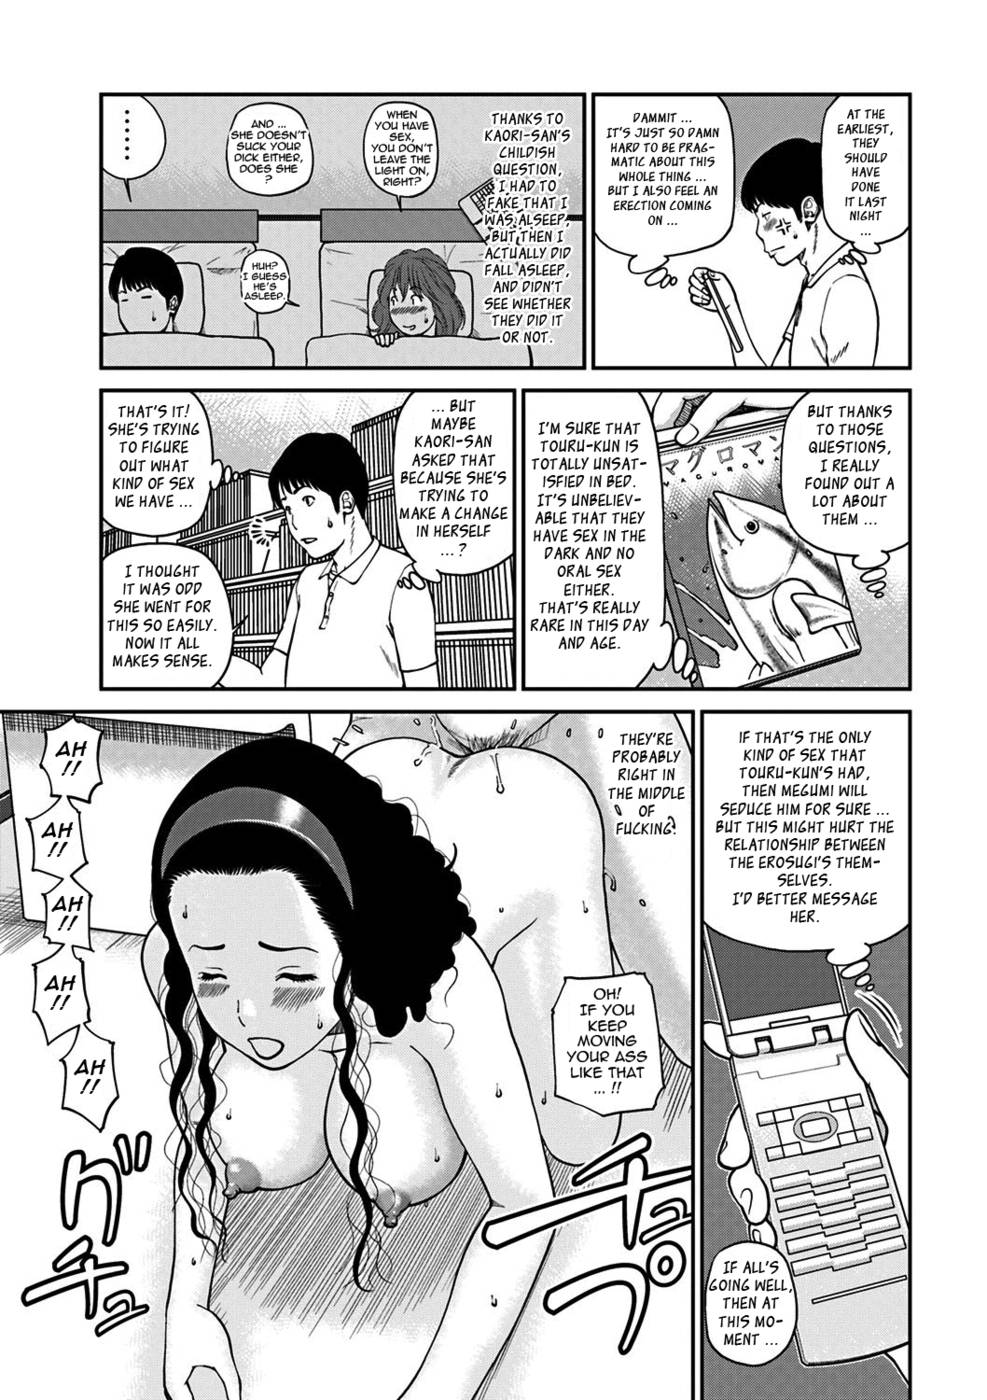 Hentai Manga Comic-33 Year Old Unsatisfied Wife-Chapter 3-Spouse Swapping-Second Day-5